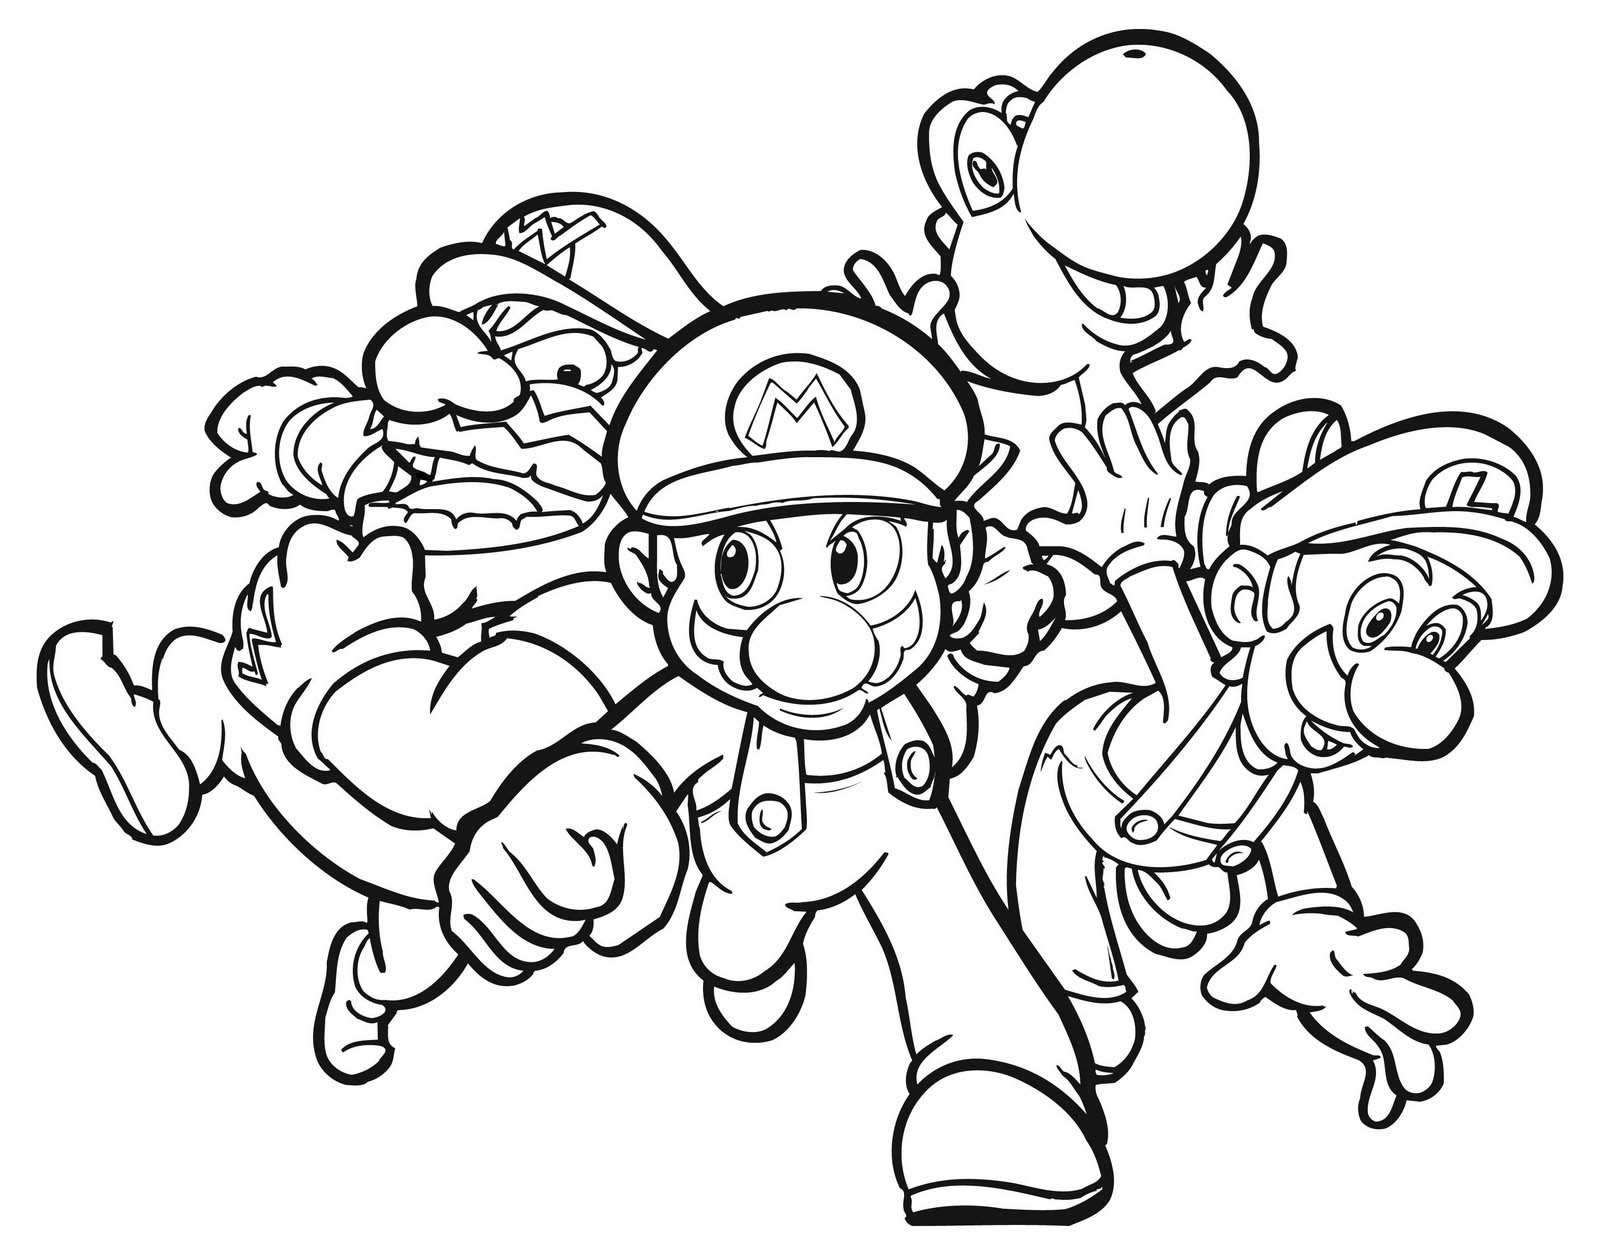 mario characters coloring pages mario characters coloring pages getcoloringpagescom mario coloring characters pages 